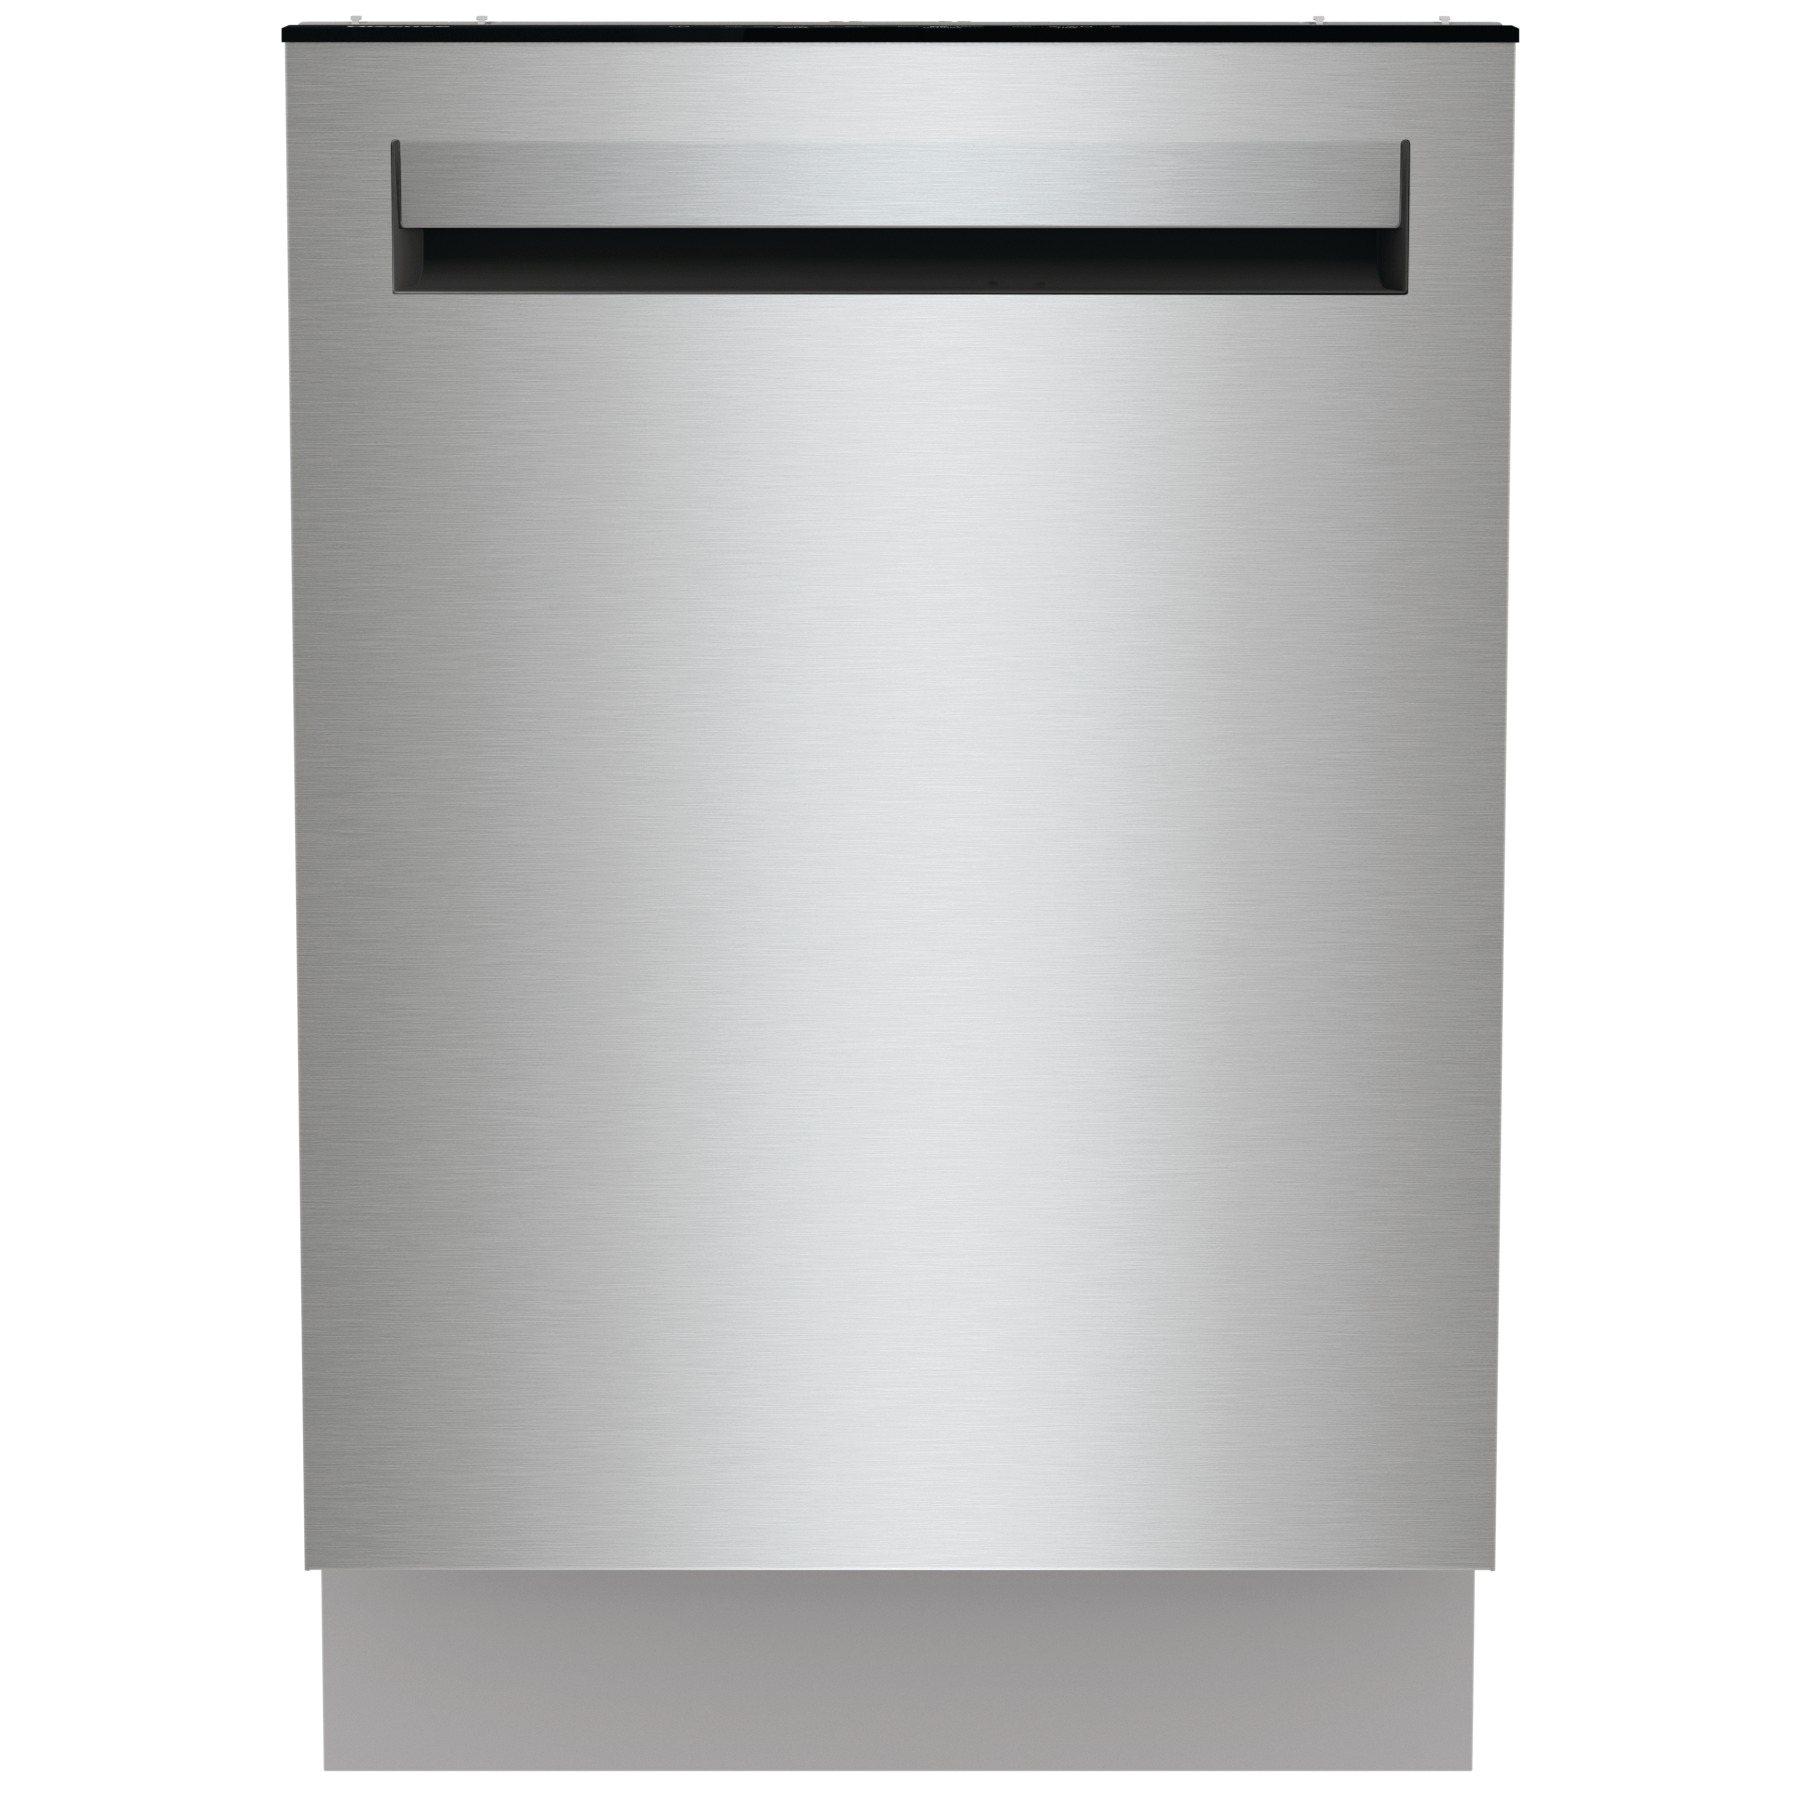 hisense-built-in-dishwashers-at-lowes